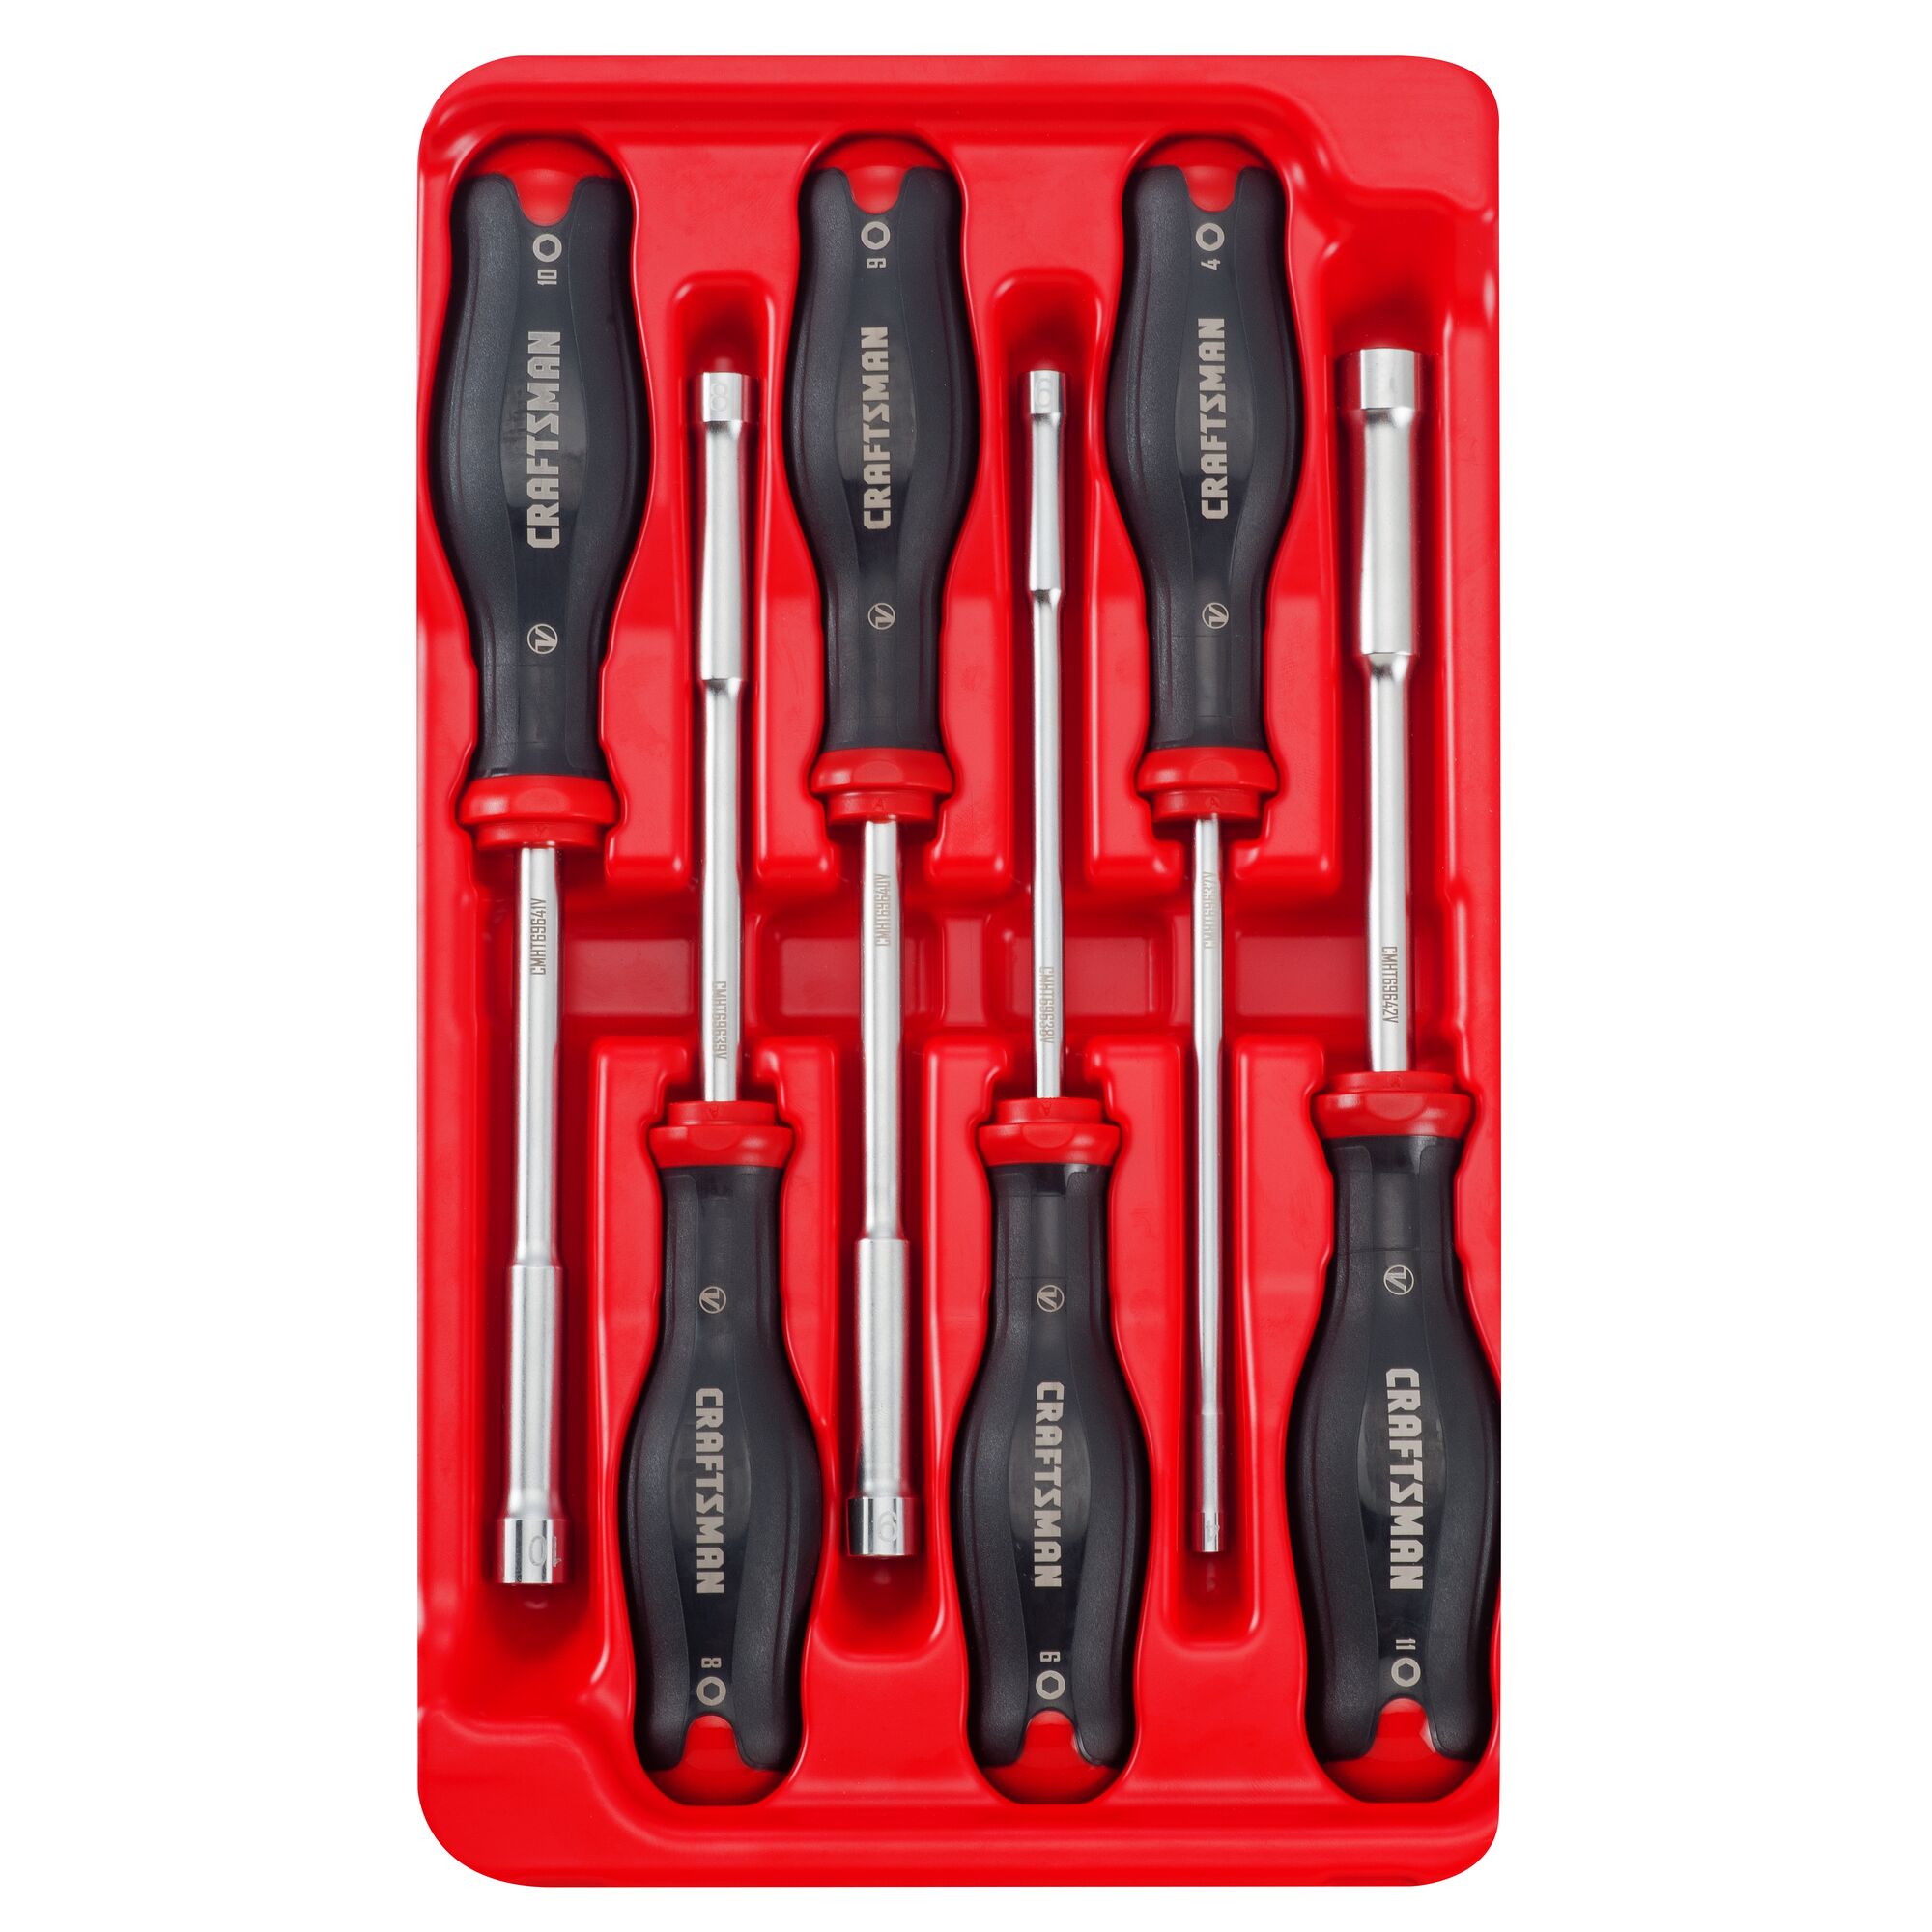 V Series 6 piece Metric Nut Driver Set in packaging.